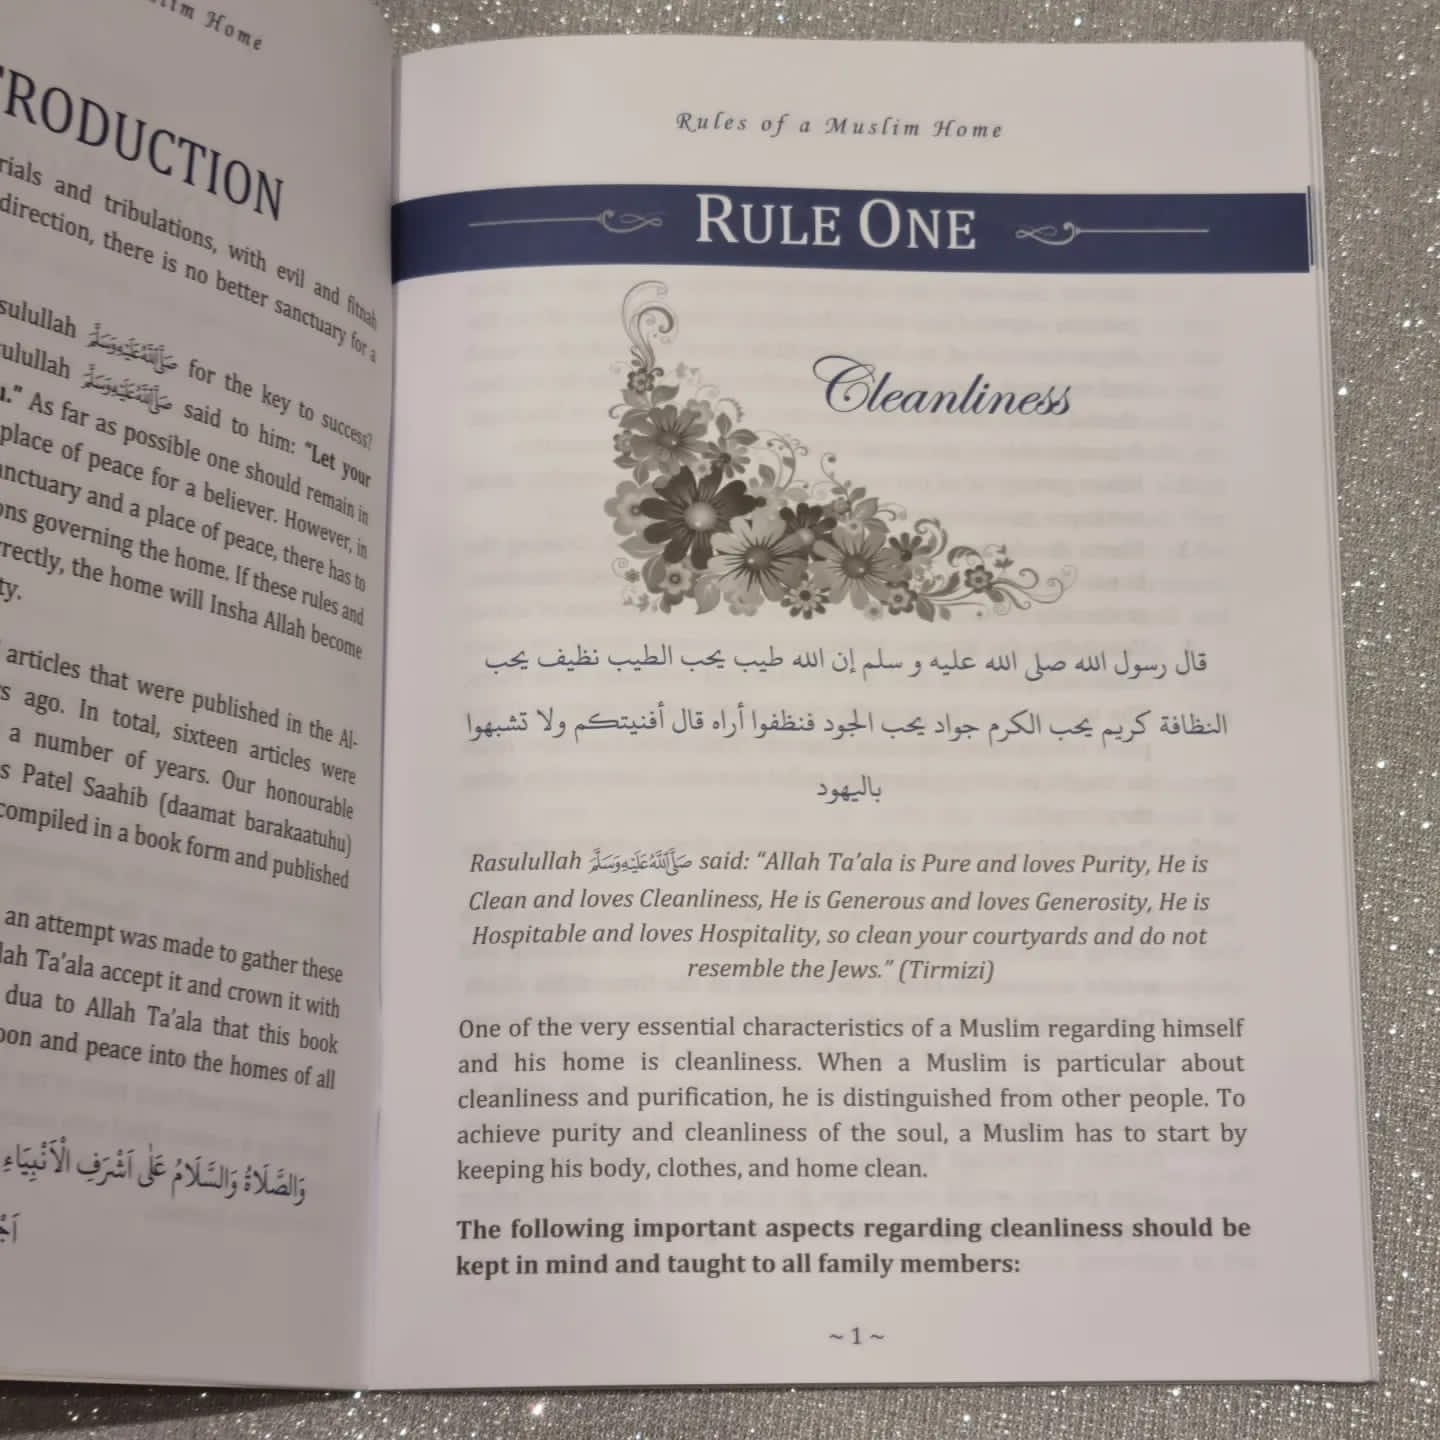 Rules of a Muslim Home